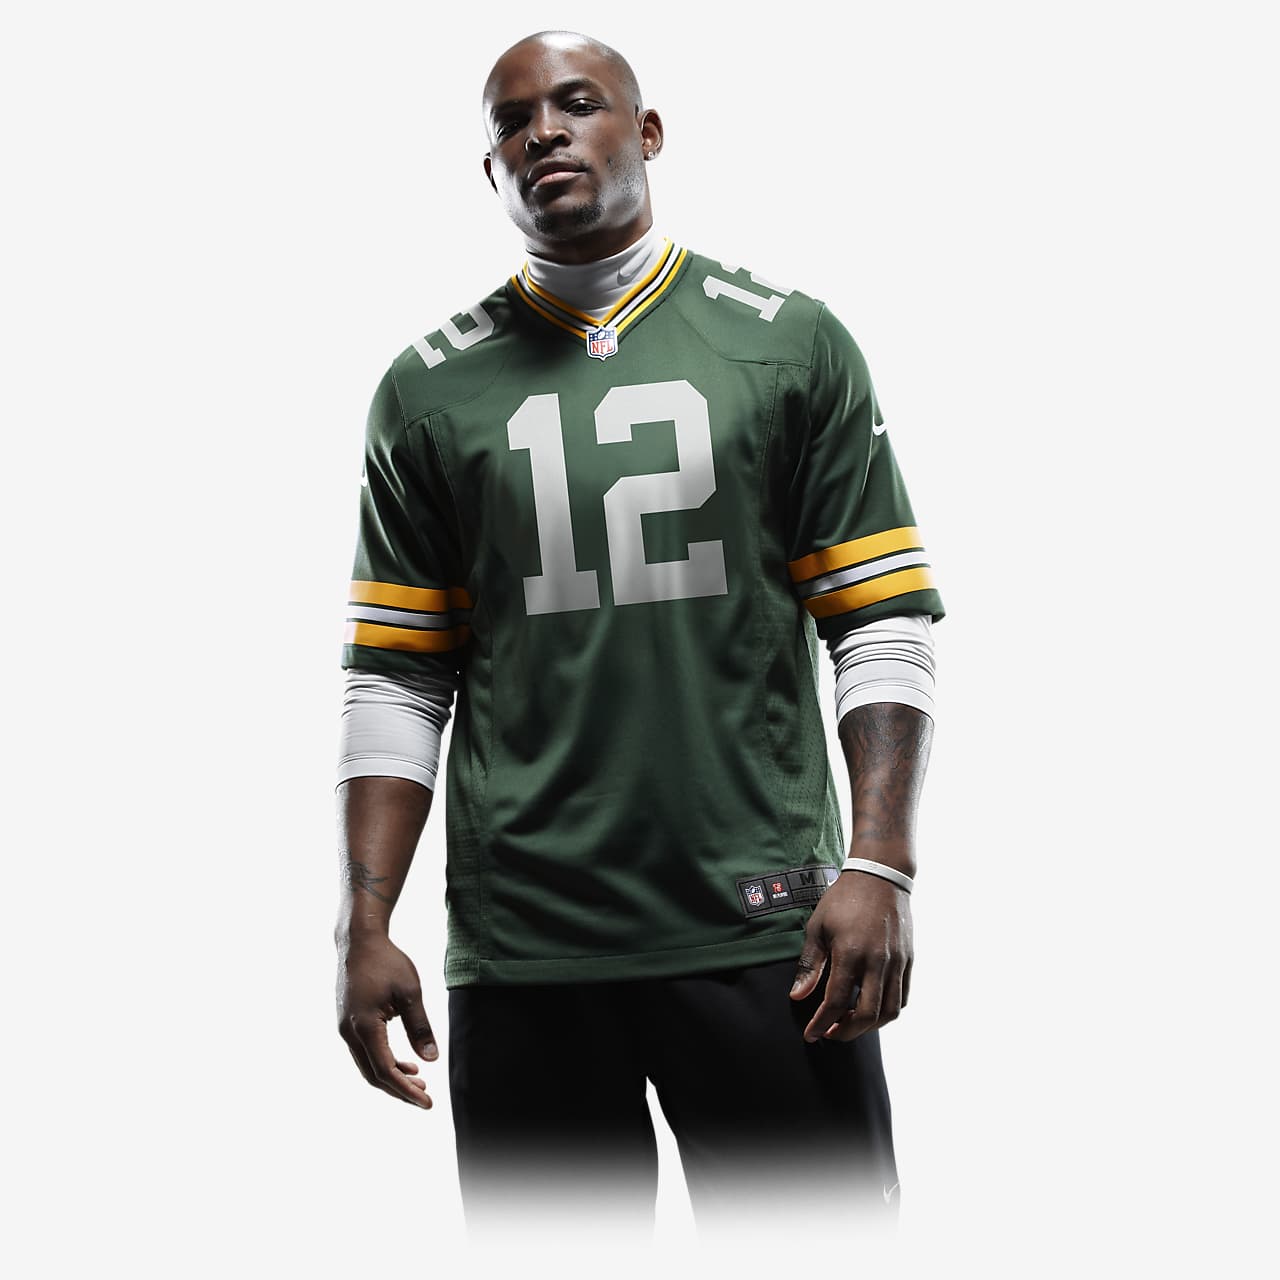 packers football jersey